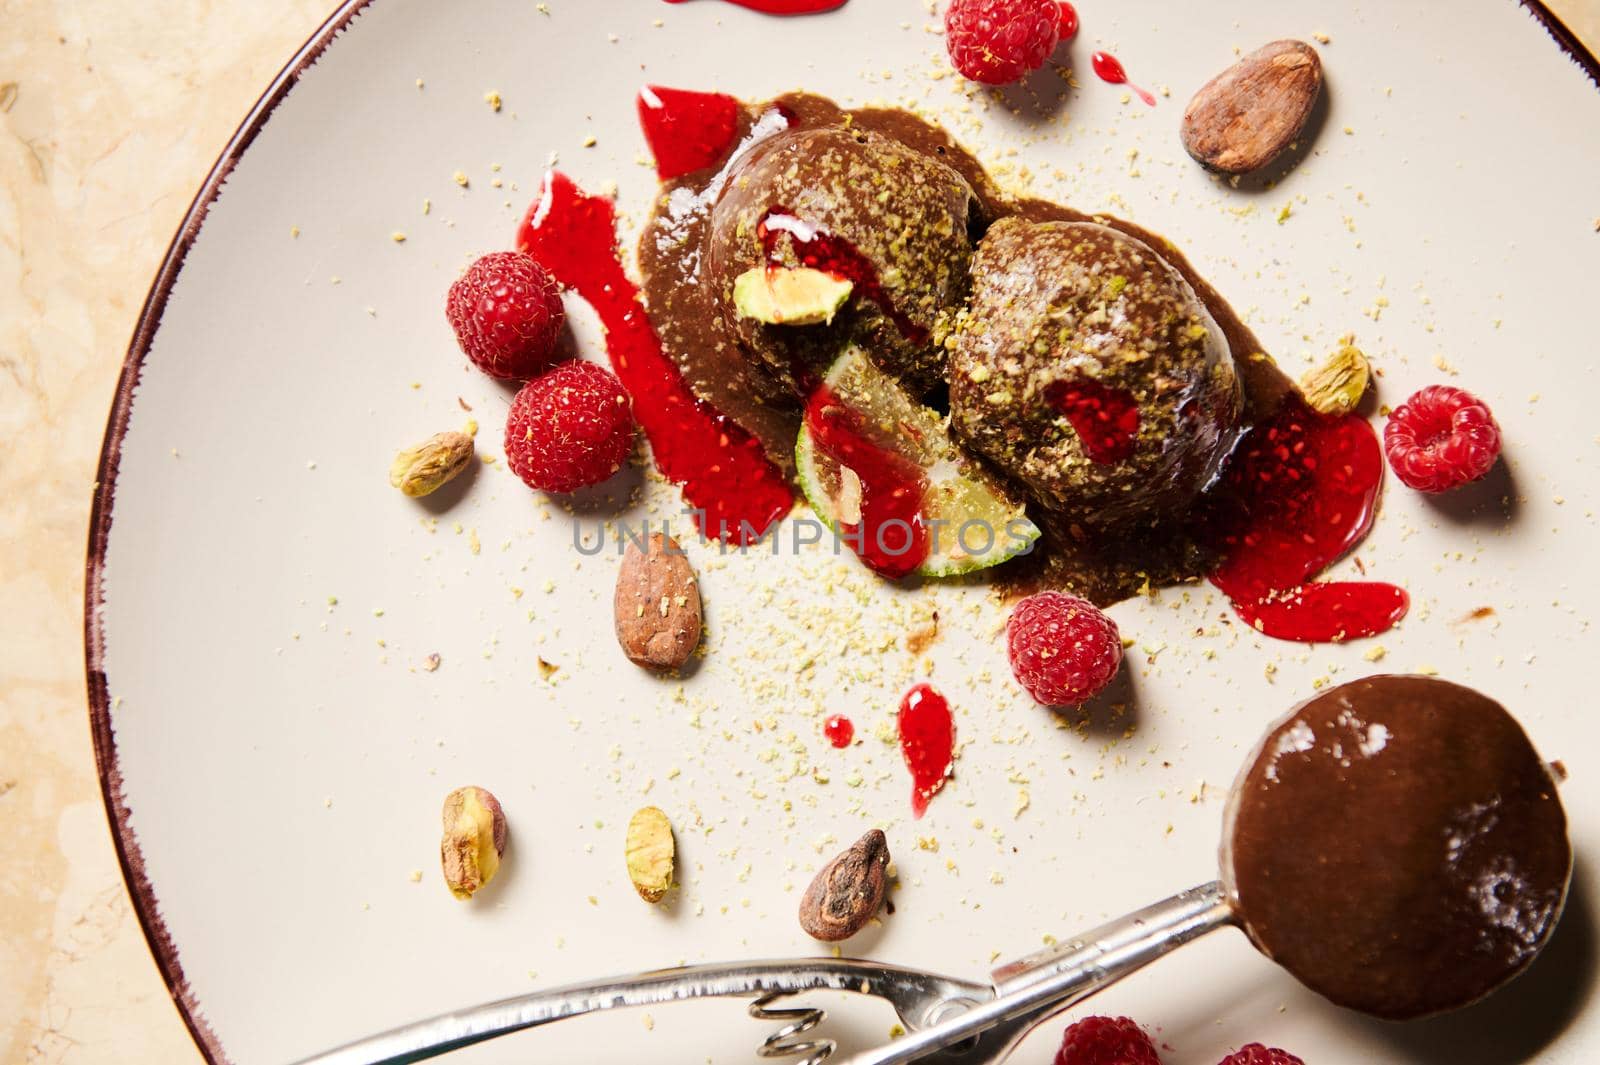 Top view of a metal scoop for sorbet, with homemade, dairy free chocolate ice cream, garnished with grated pistachios, raspberries, cocoa beans and berry jam on a white plate. Food still life